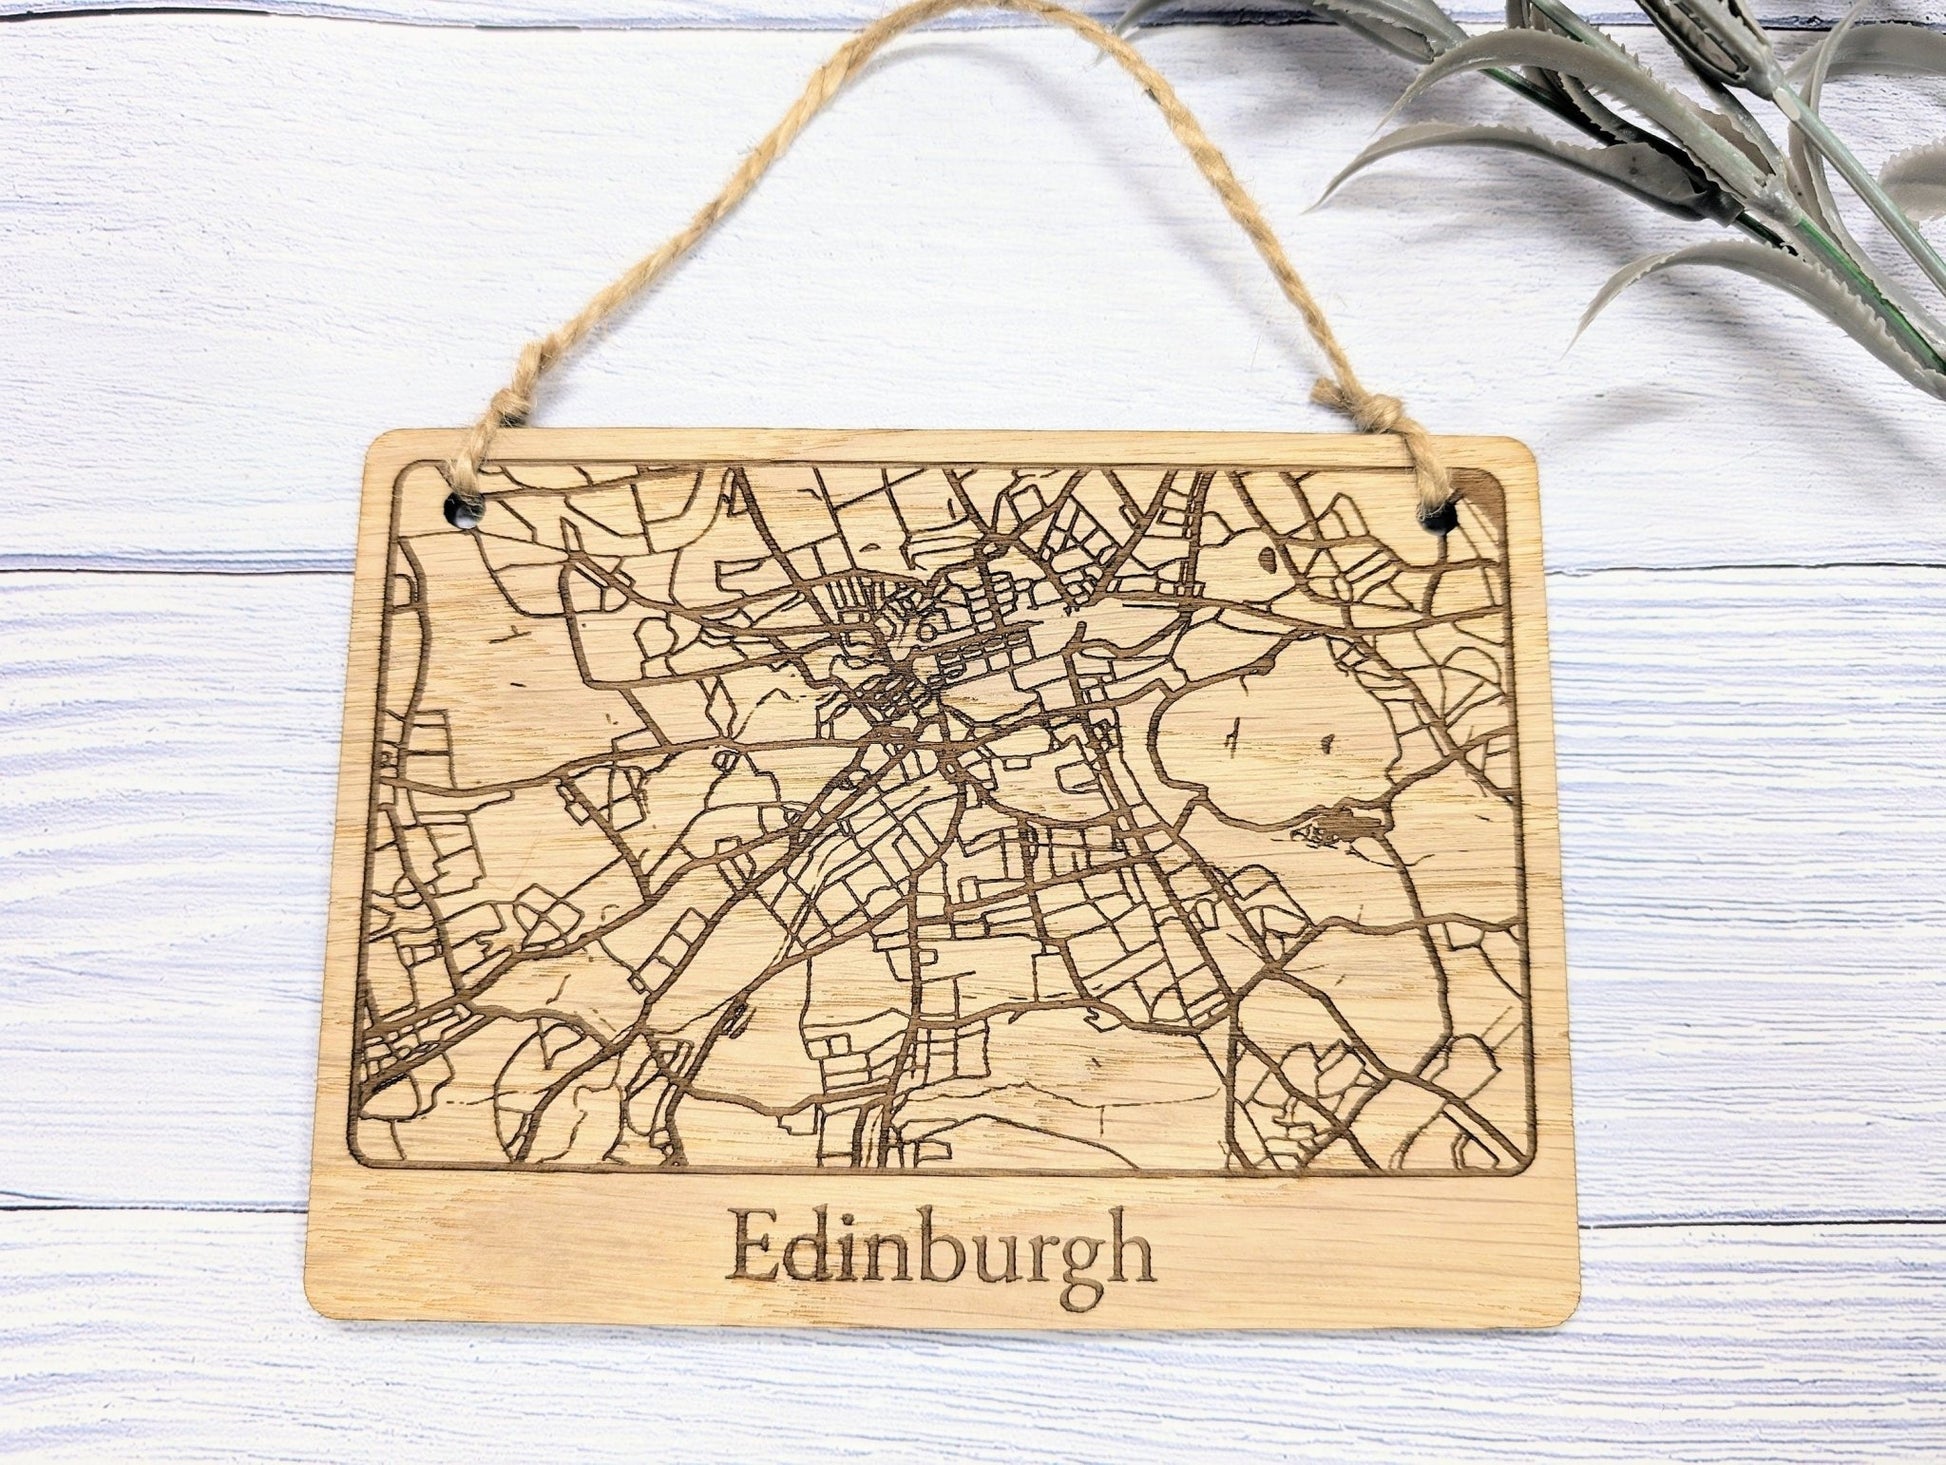 Handcrafted Wooden Map Wall Art of Edinburgh, UK - Available in 4 Sizes - Perfect Home Decor or Unique Gift - CherryGroveCraft